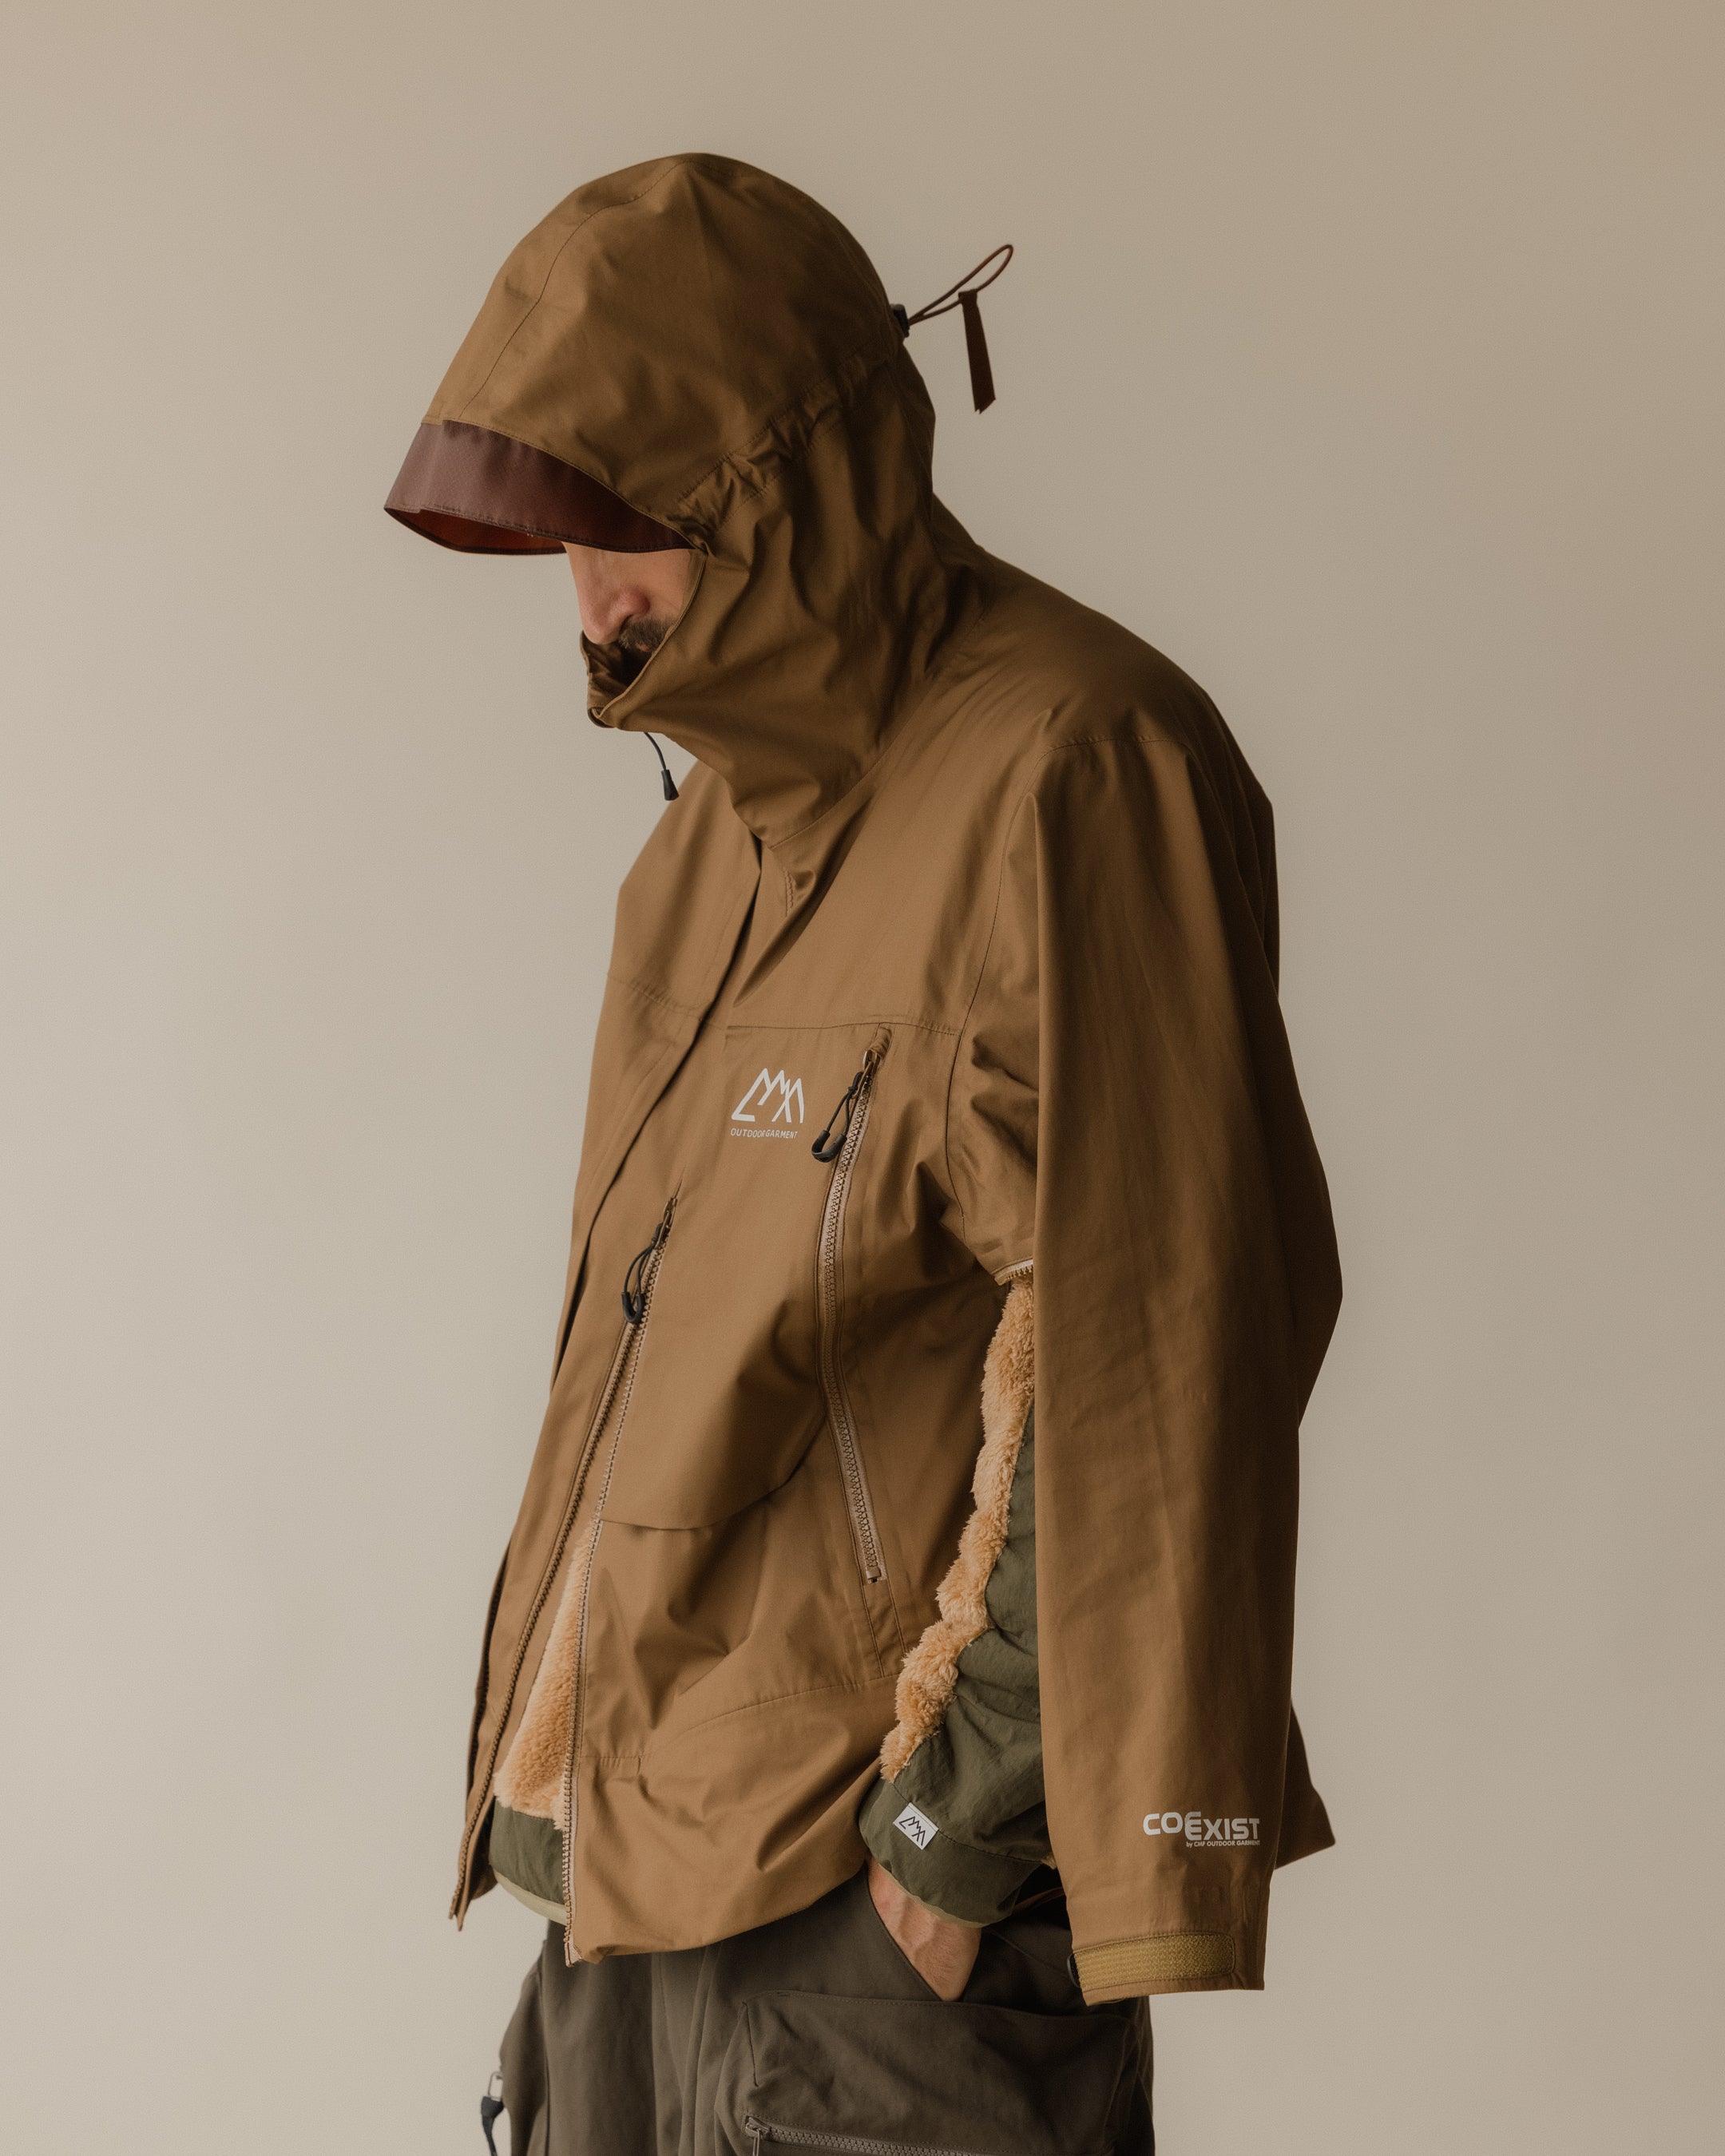 An Overview of Autumn/Winter '21 Rainwear Courtesy of CMF Outdoor